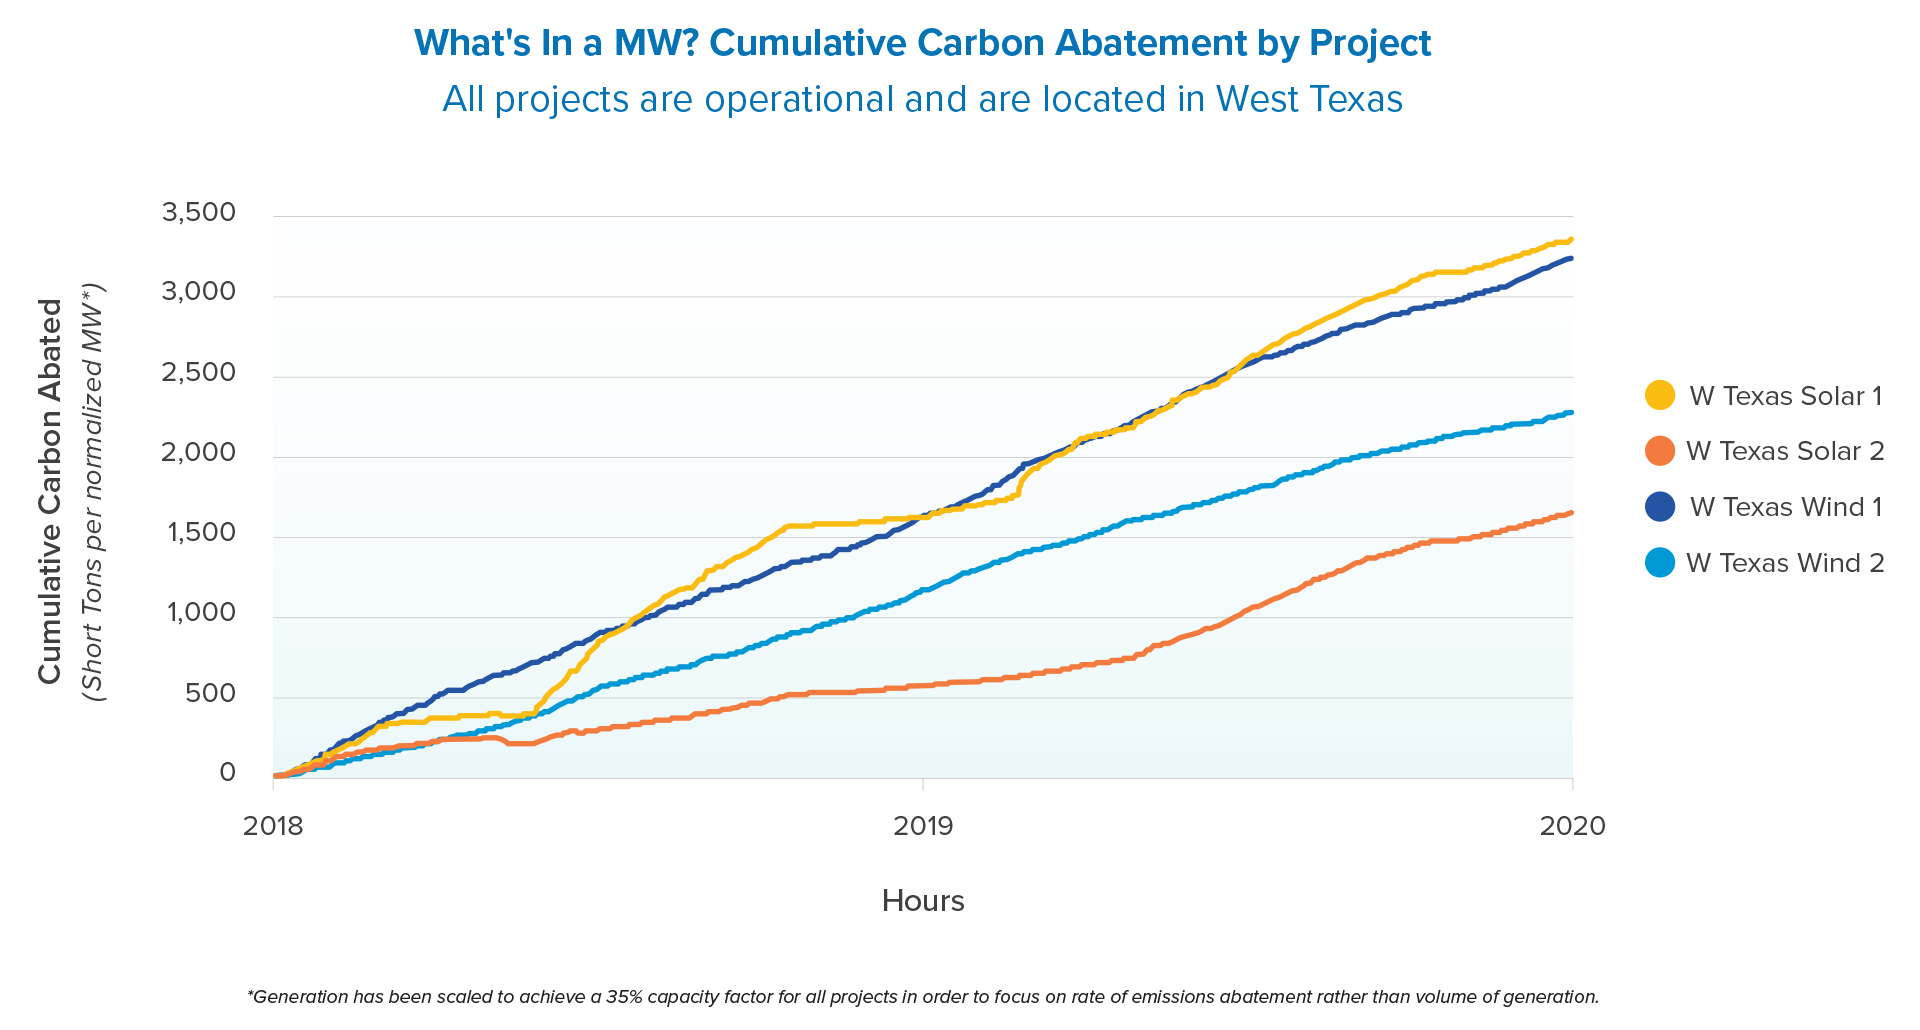 Whats-in-a-MW-Cumulative-Carbon-Abatement-by-Project-2